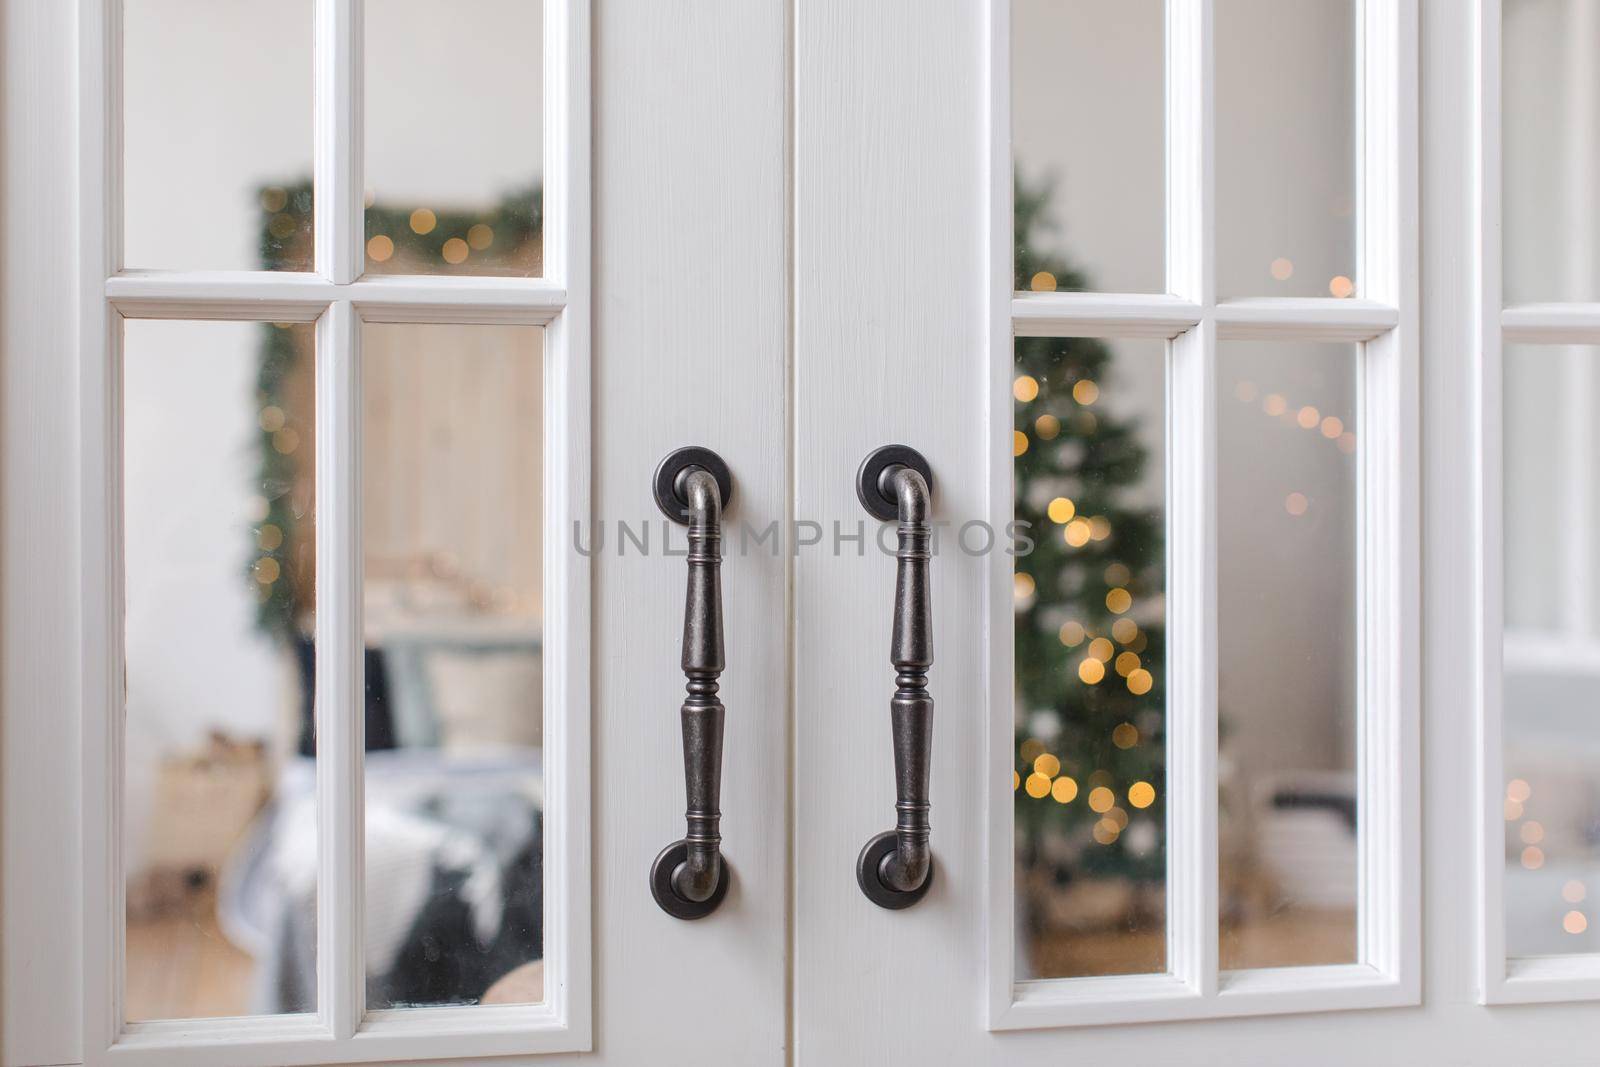 Wooden opened doors showing view of bedroom interior with Christmas tree glowing.